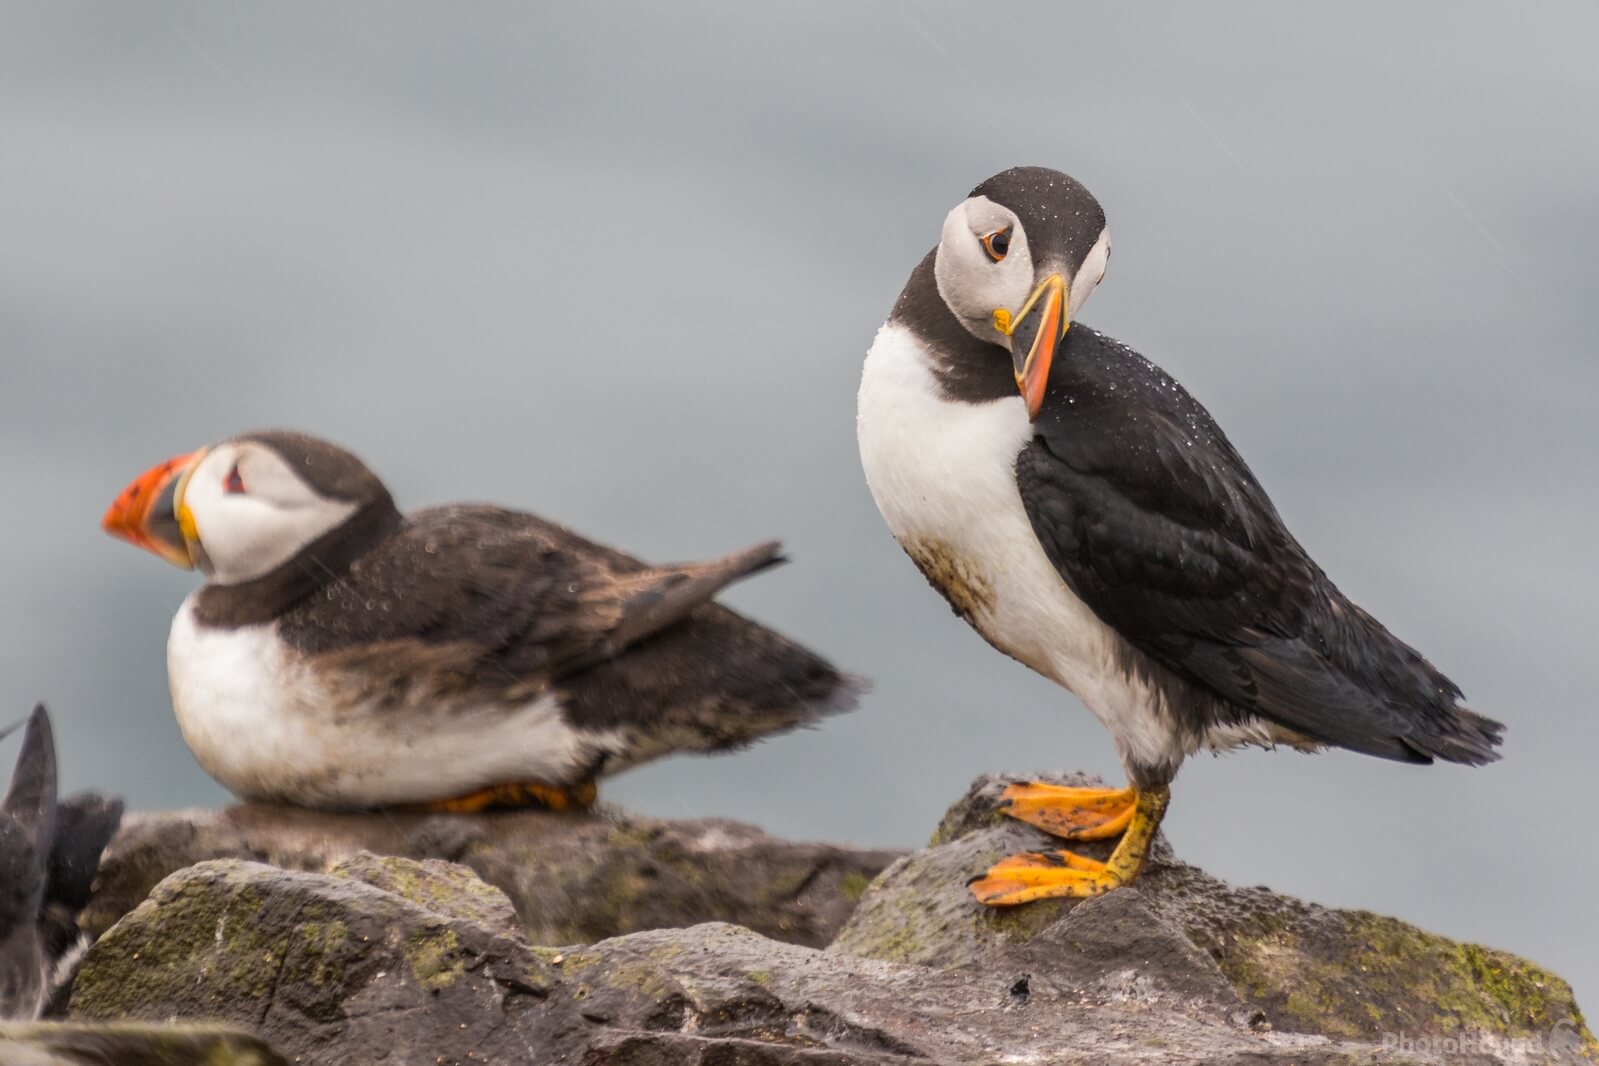 Image of The Farne Islands – Staple Island by Andy Killingbeck